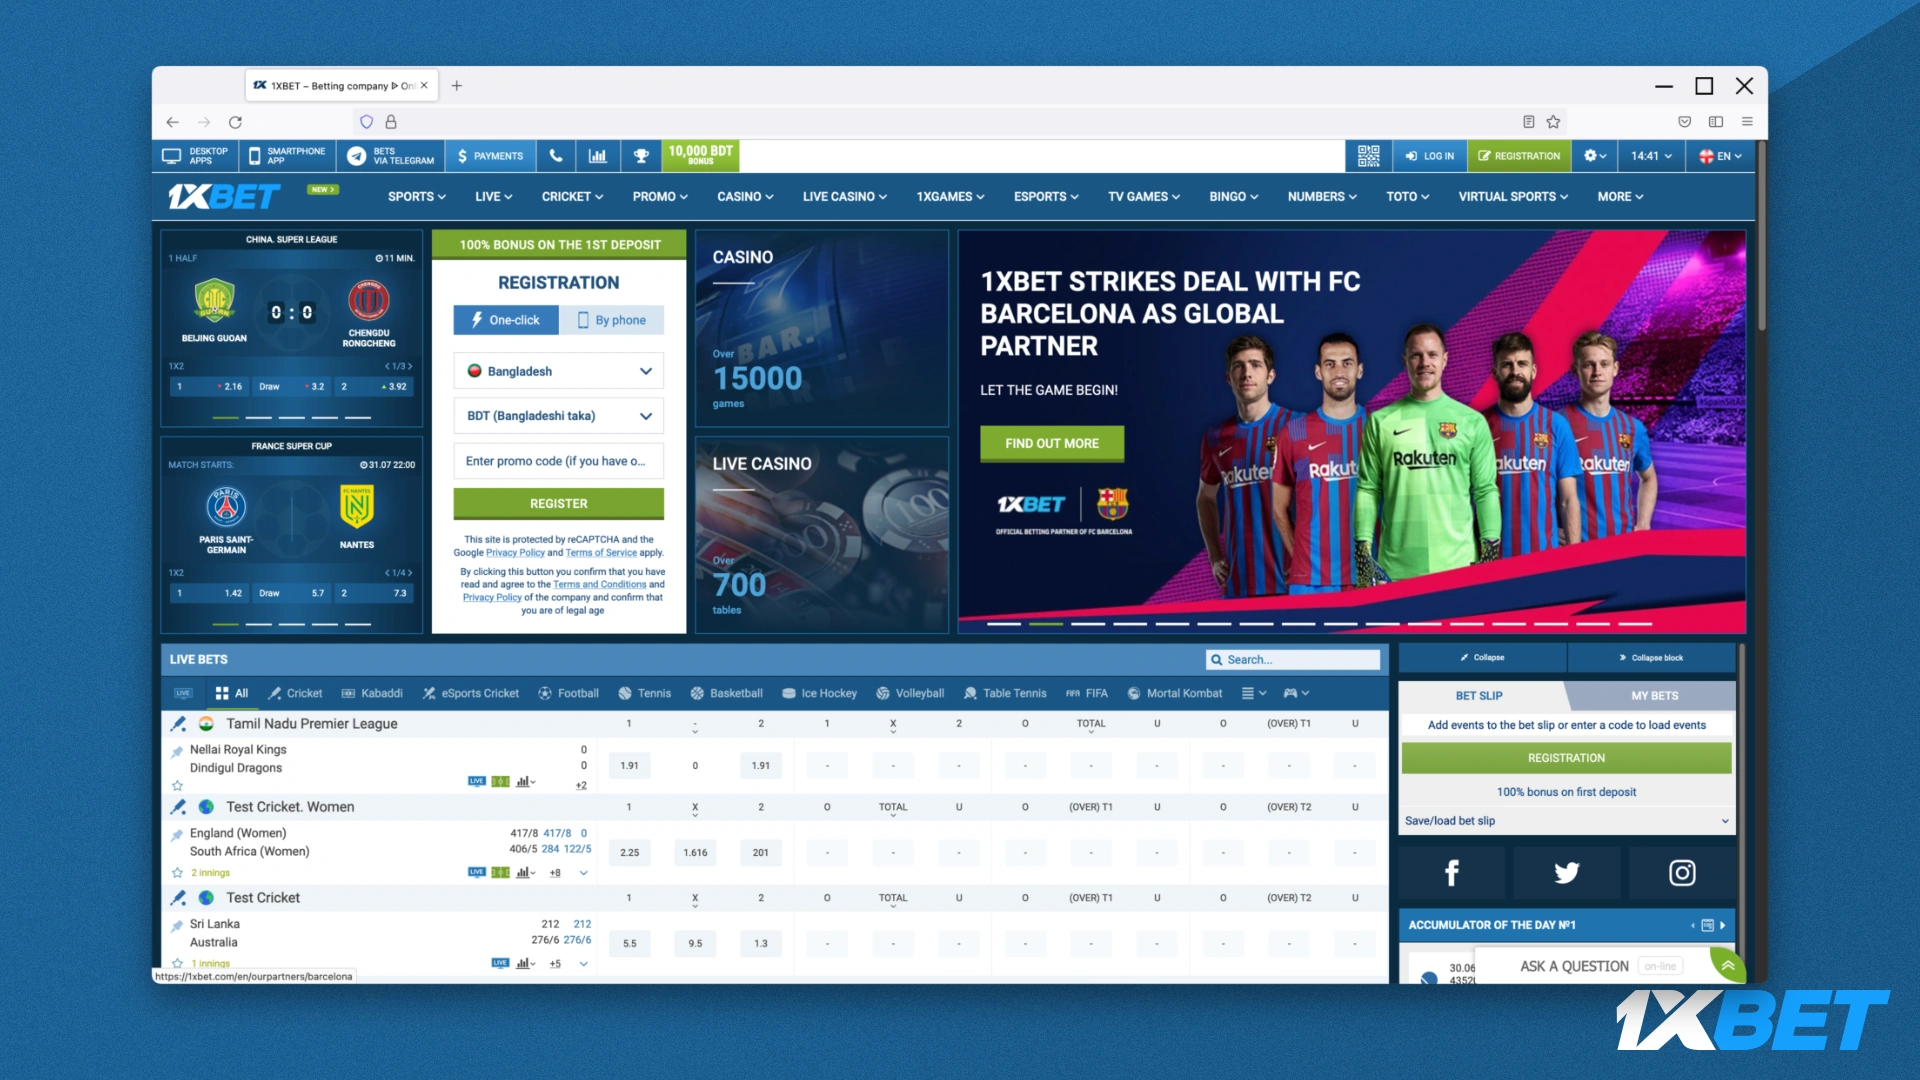 Download the 1xBet app for Windows and macOS for free from the official site